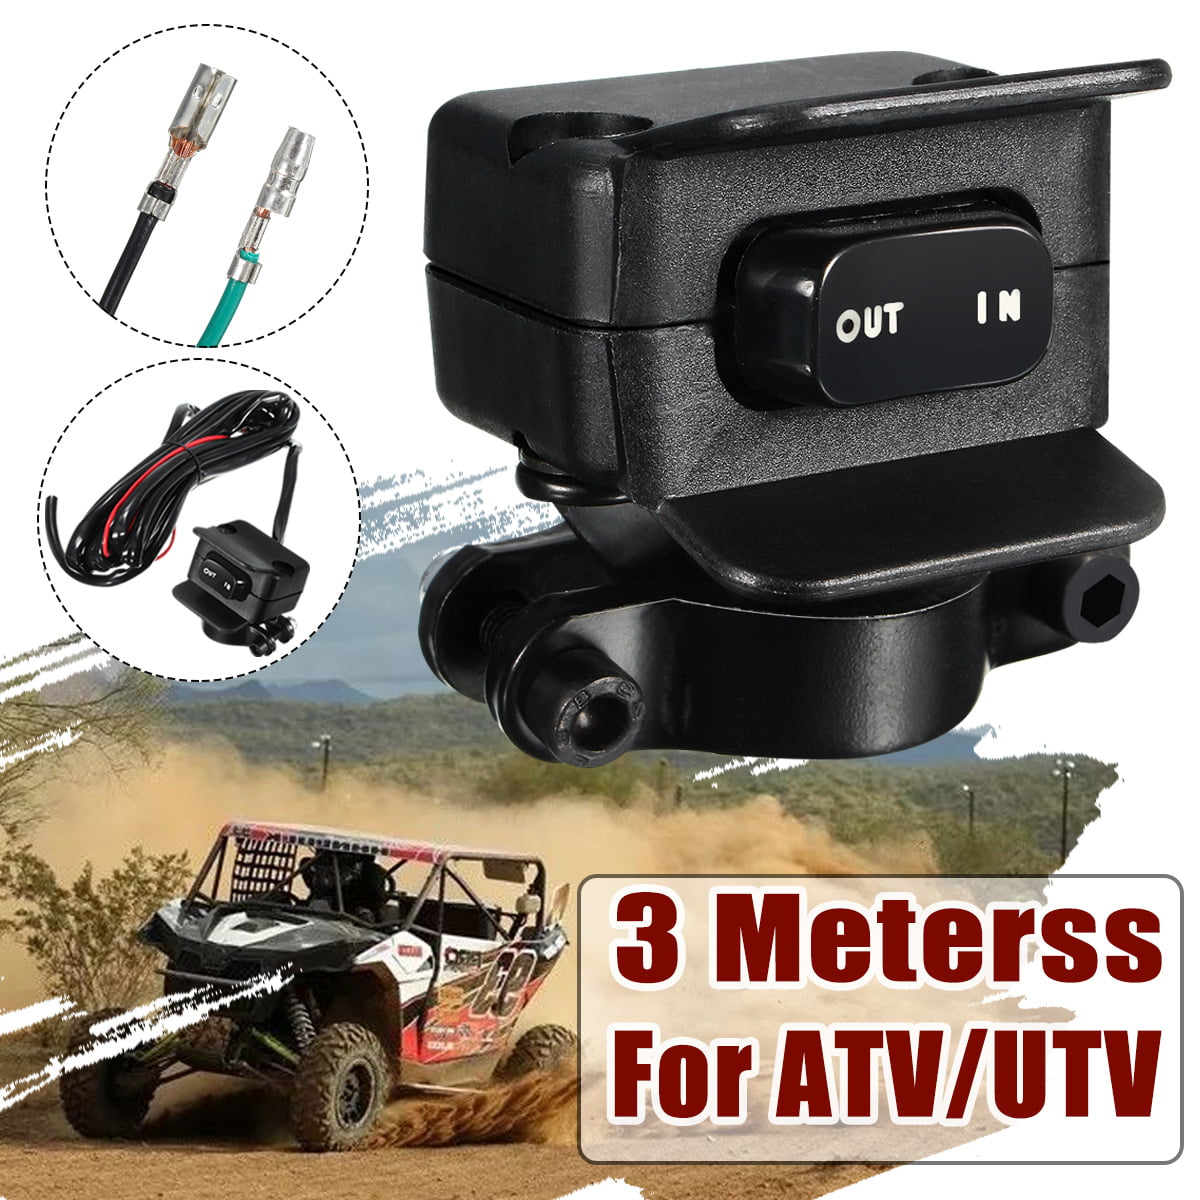 Autools 12V Winch Rocker Thumb Switch With Mounting Bracket Handle Control Switch Line Kit for ATV UTV 